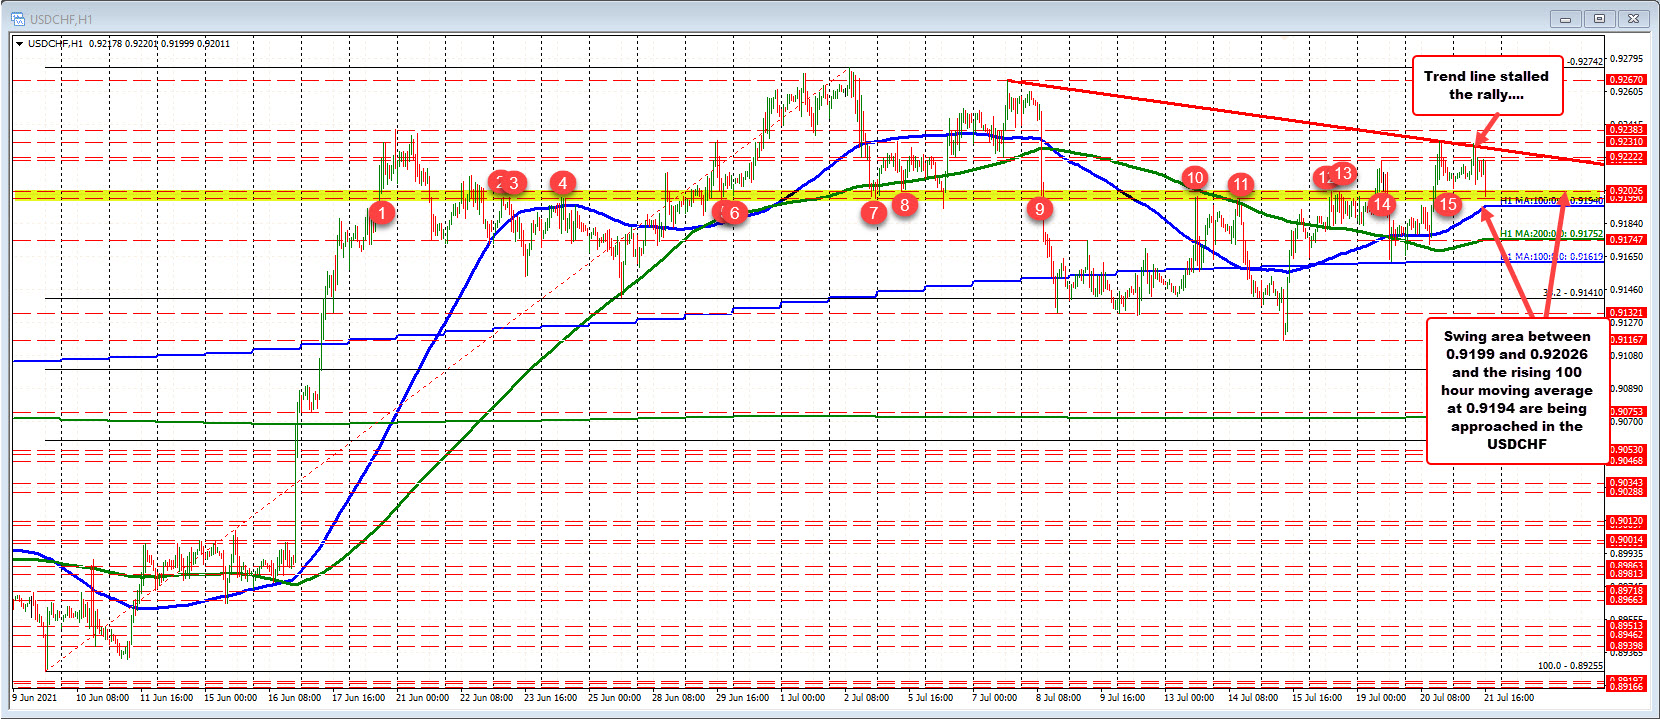 100 hour moving average at 0.9194 in the USDCHF.